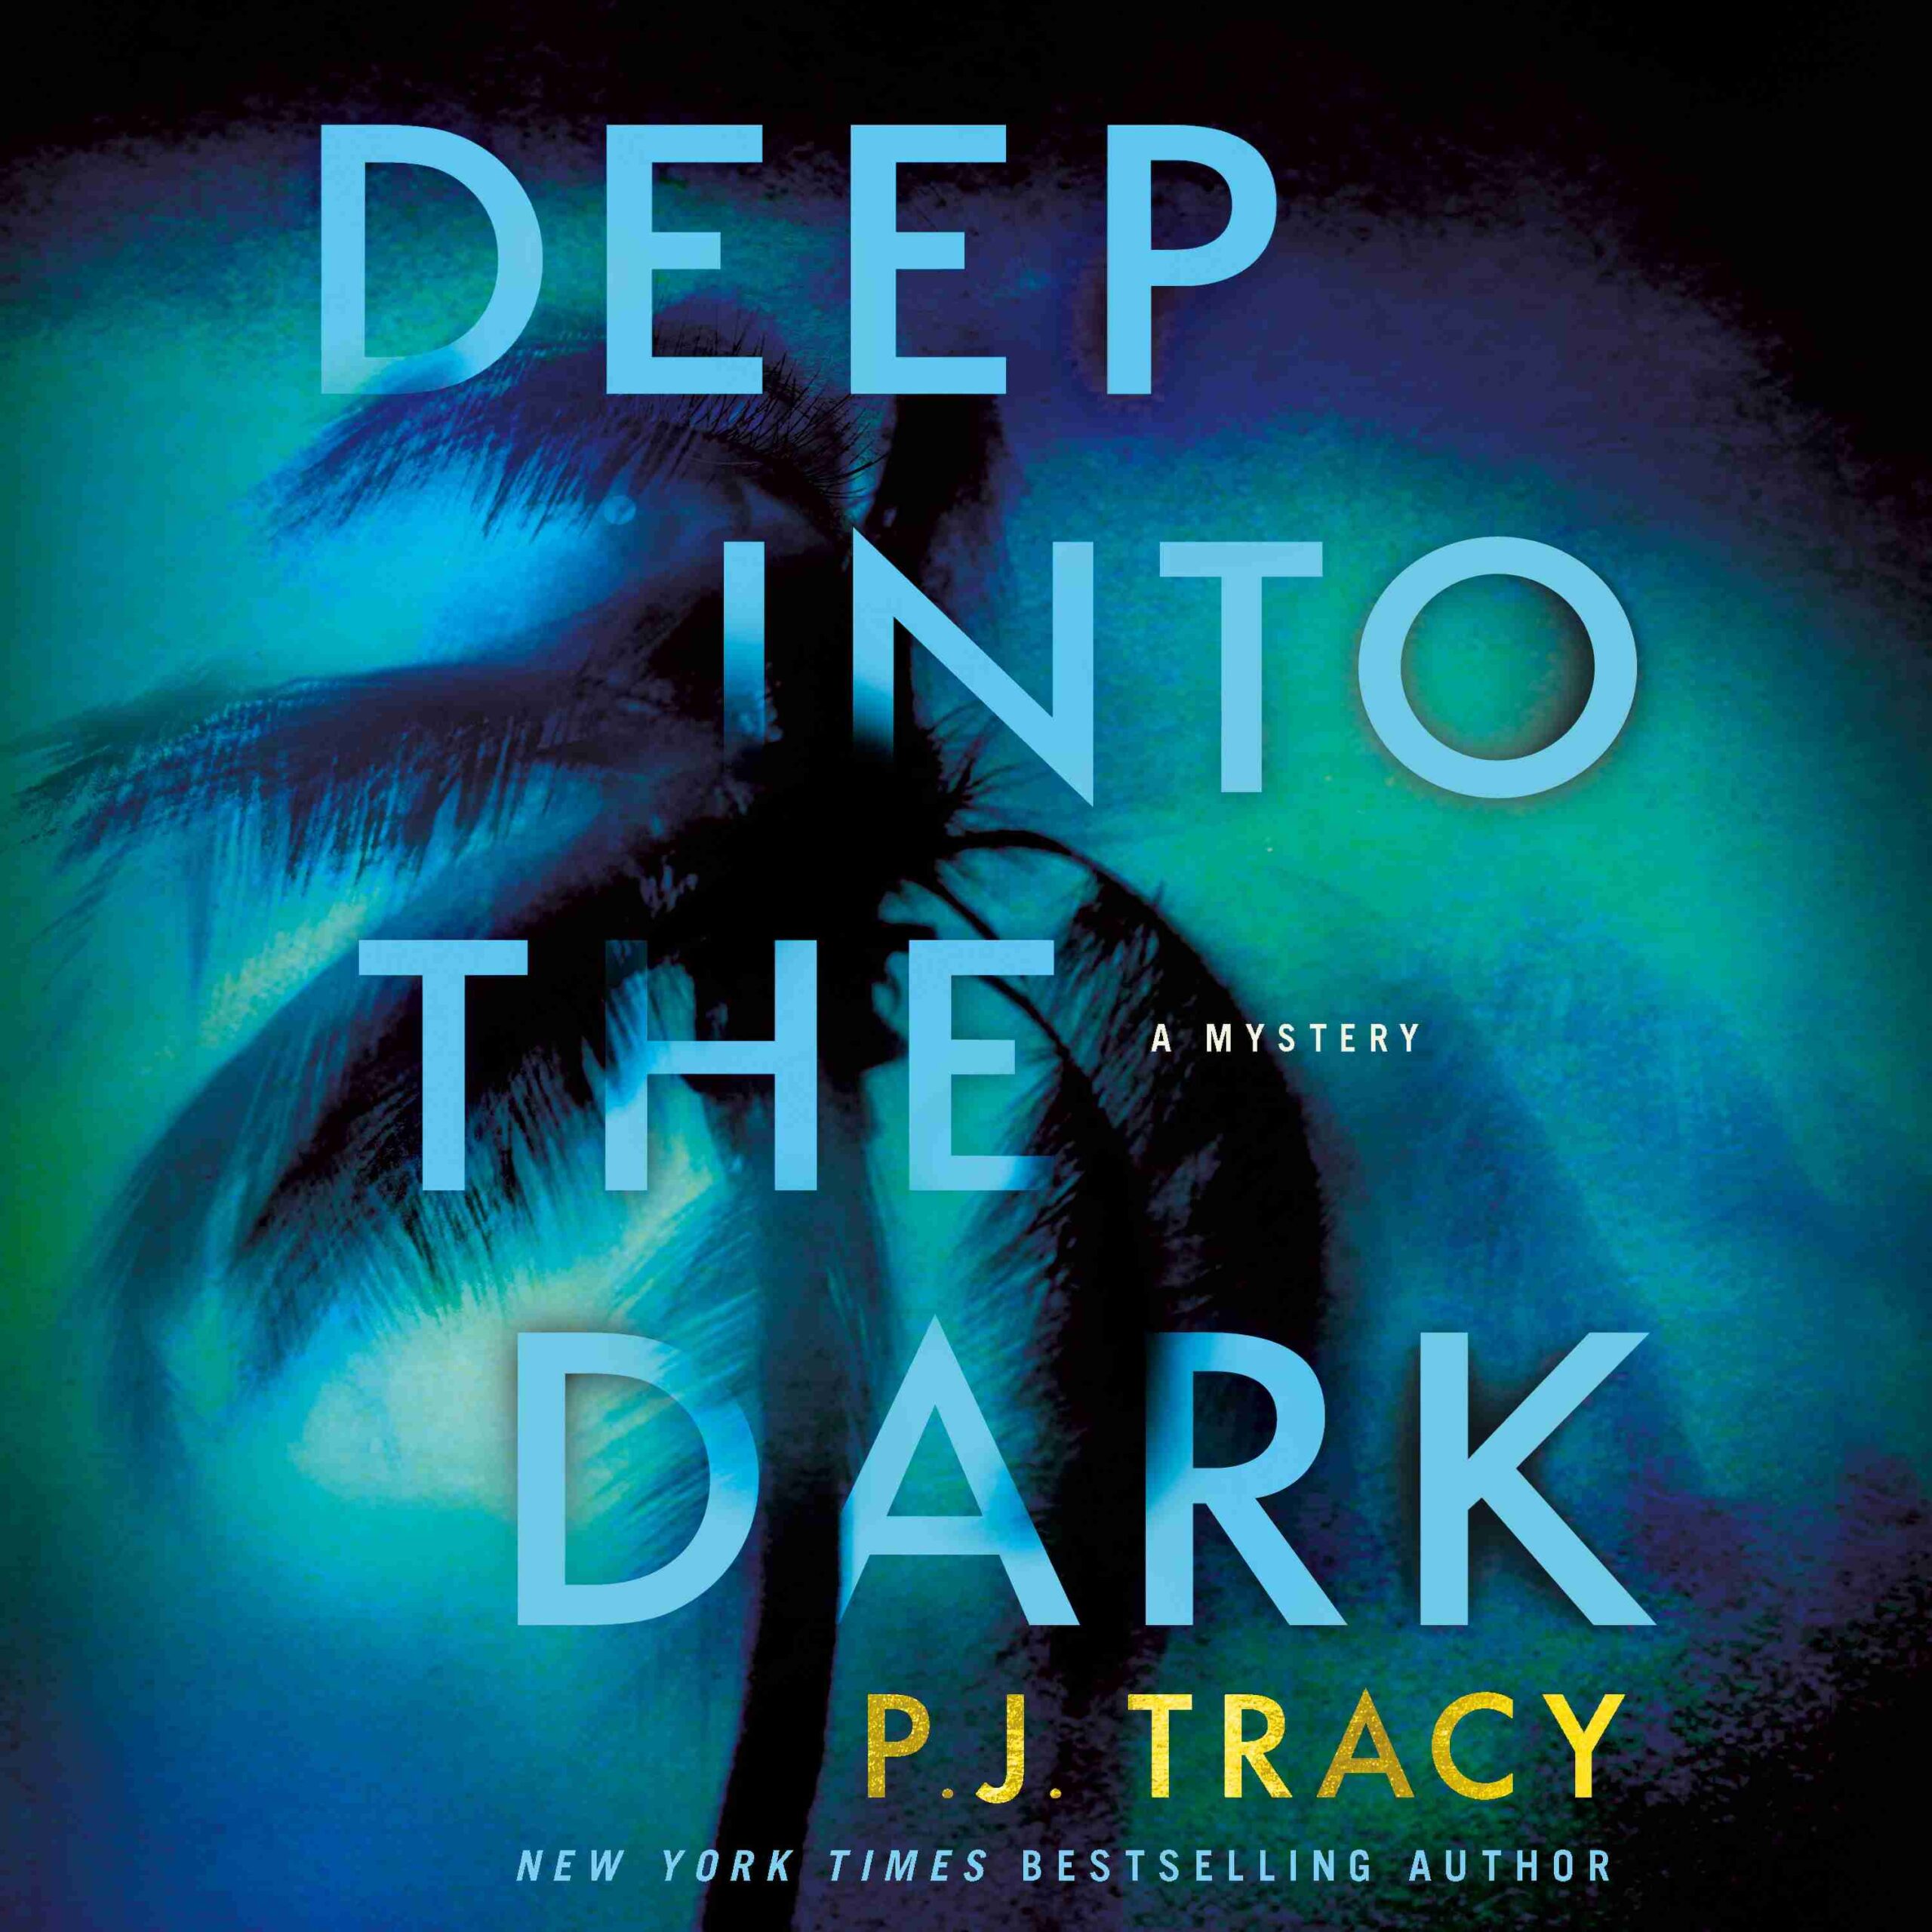 Deep into the Dark byP. J. Tracy Audiobook. 19.99 USD